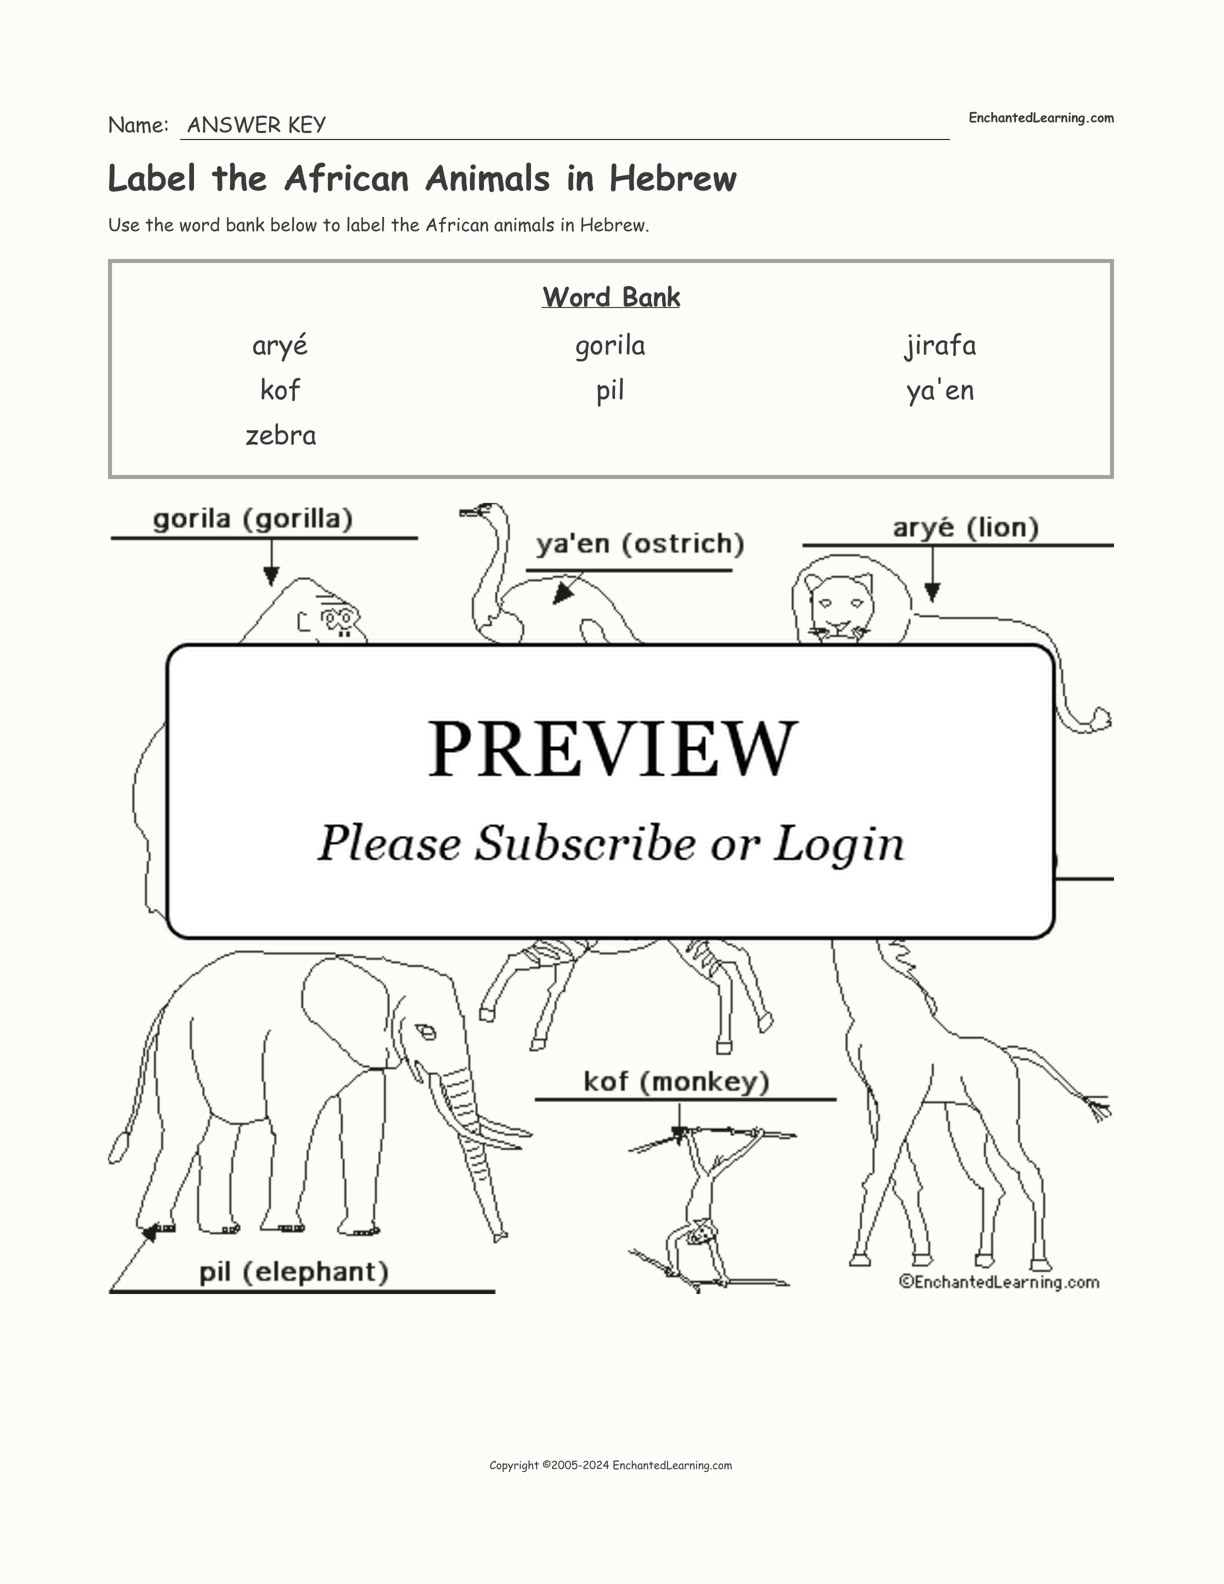 Label the African Animals in Hebrew interactive worksheet page 2